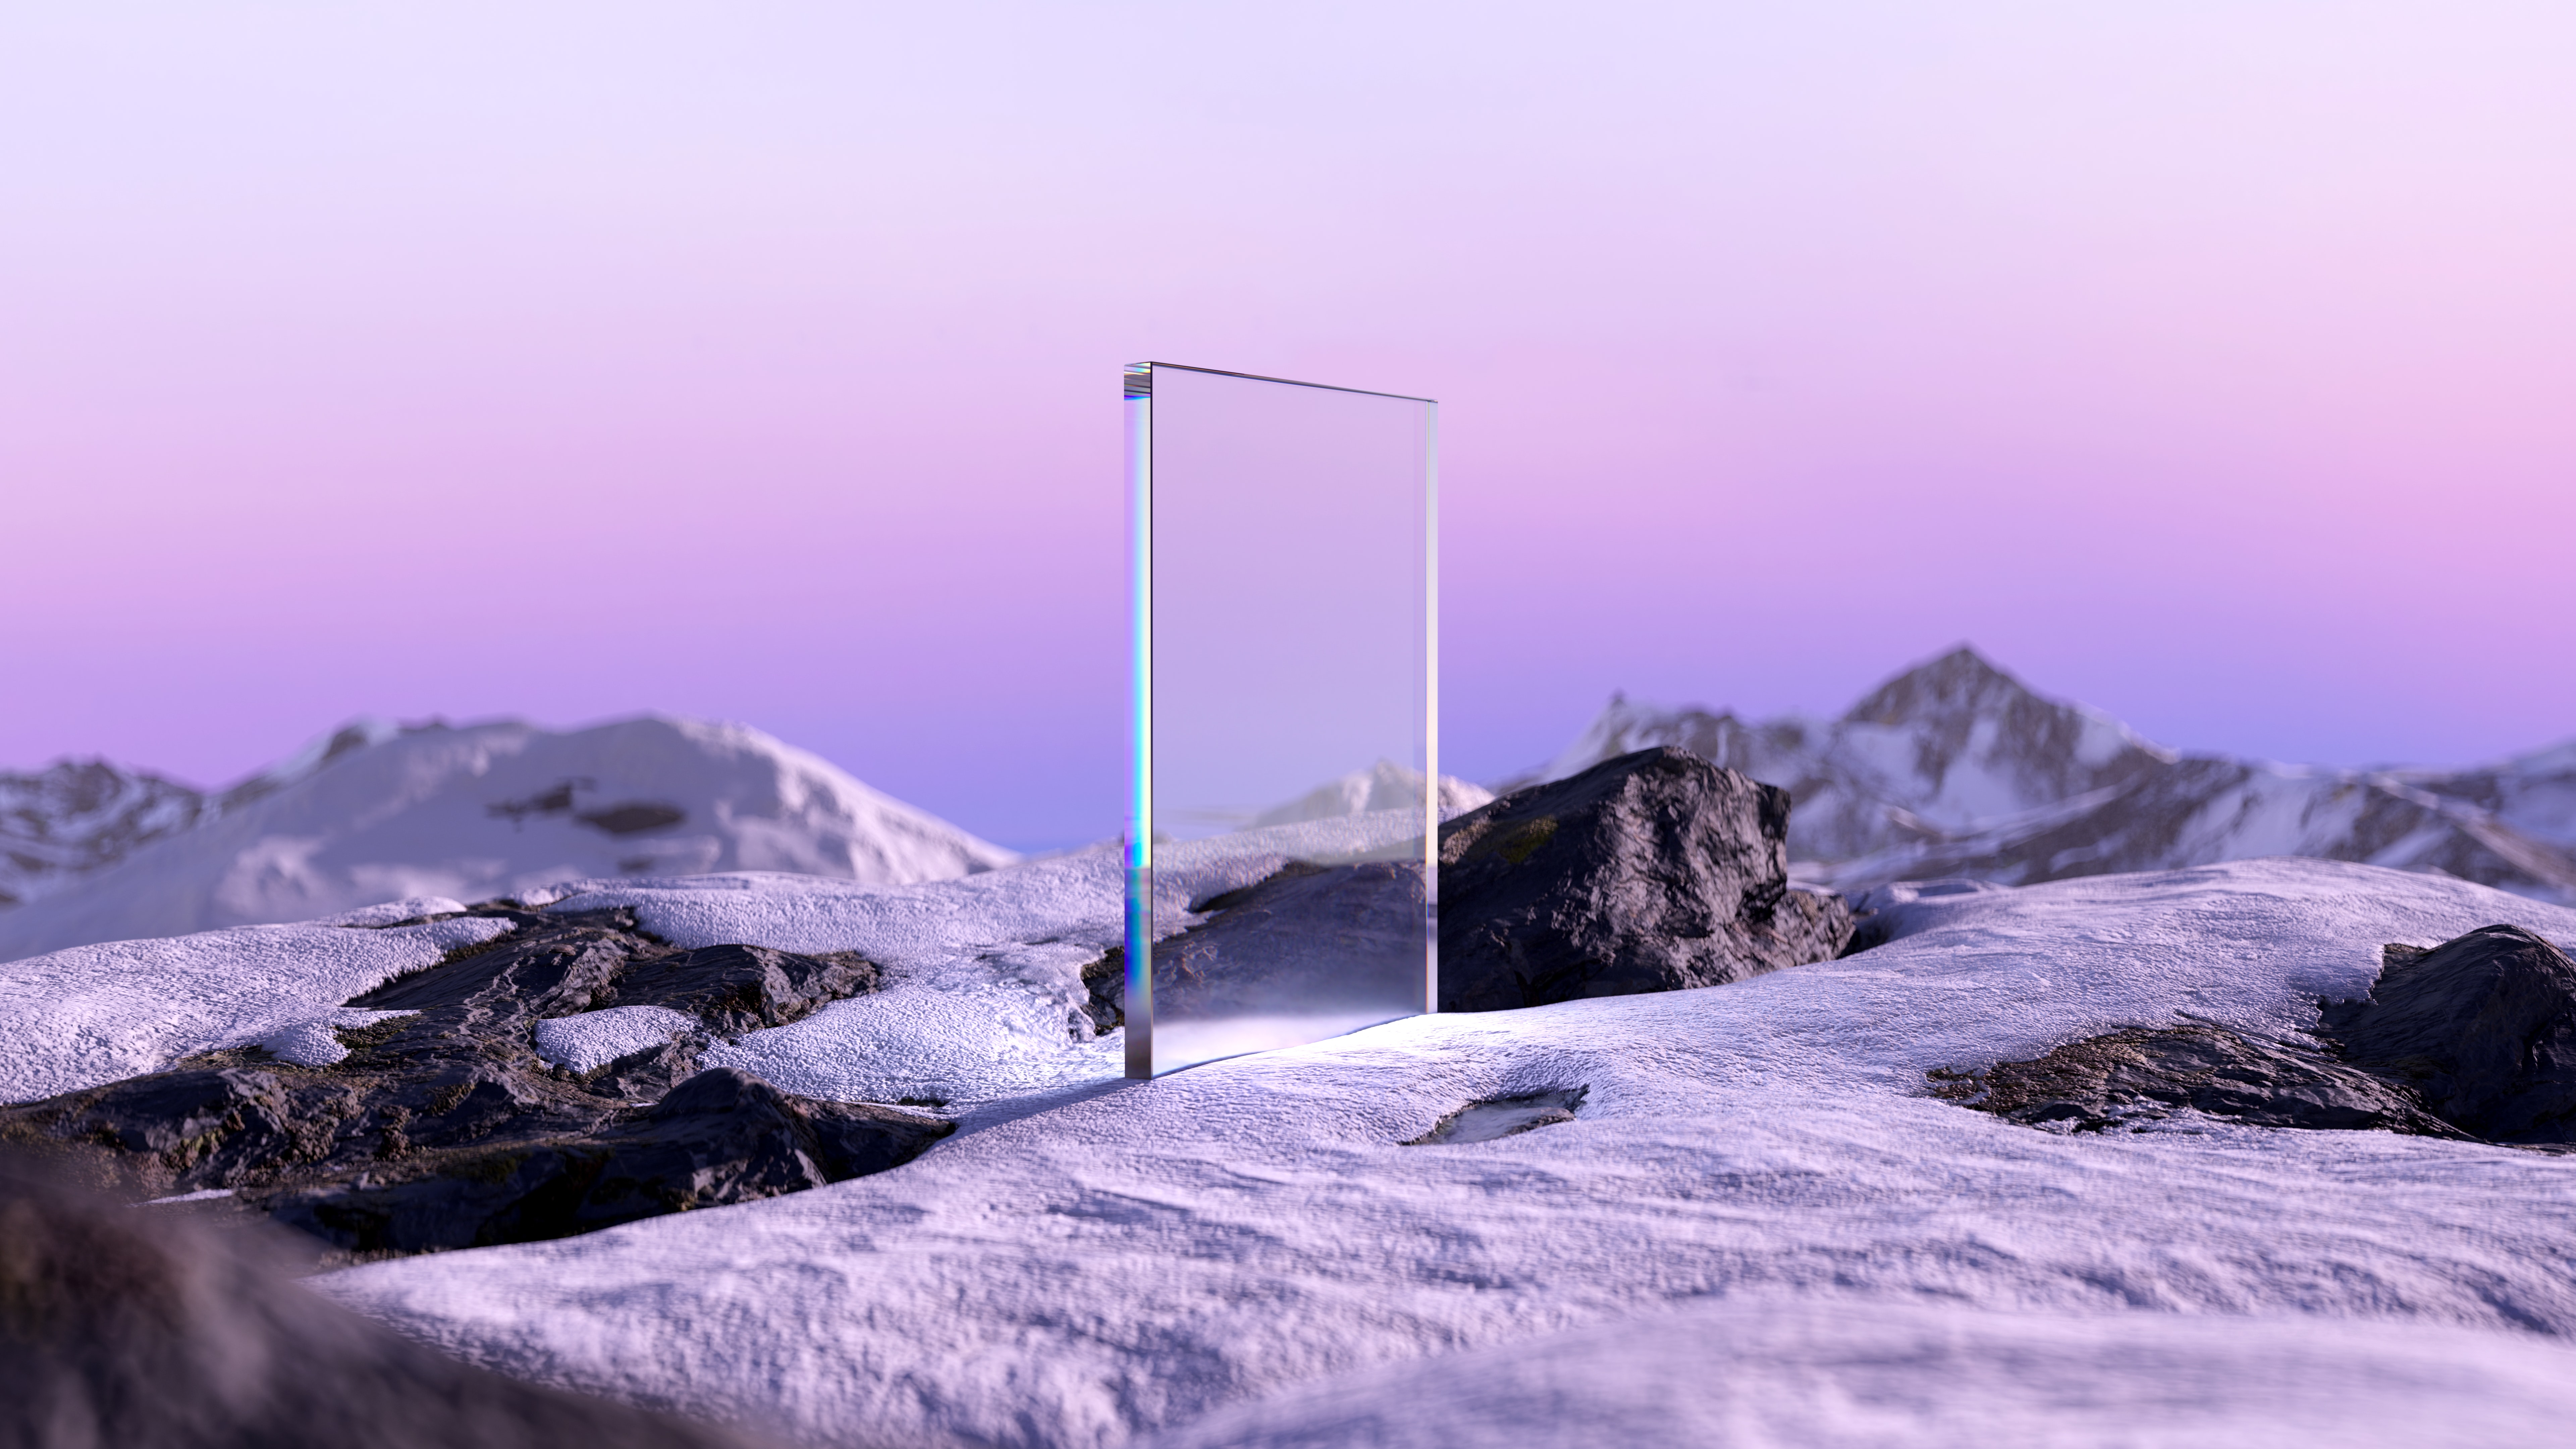 General 7680x4320 crystal  portal nature landscape ice snow sky rocks mountains